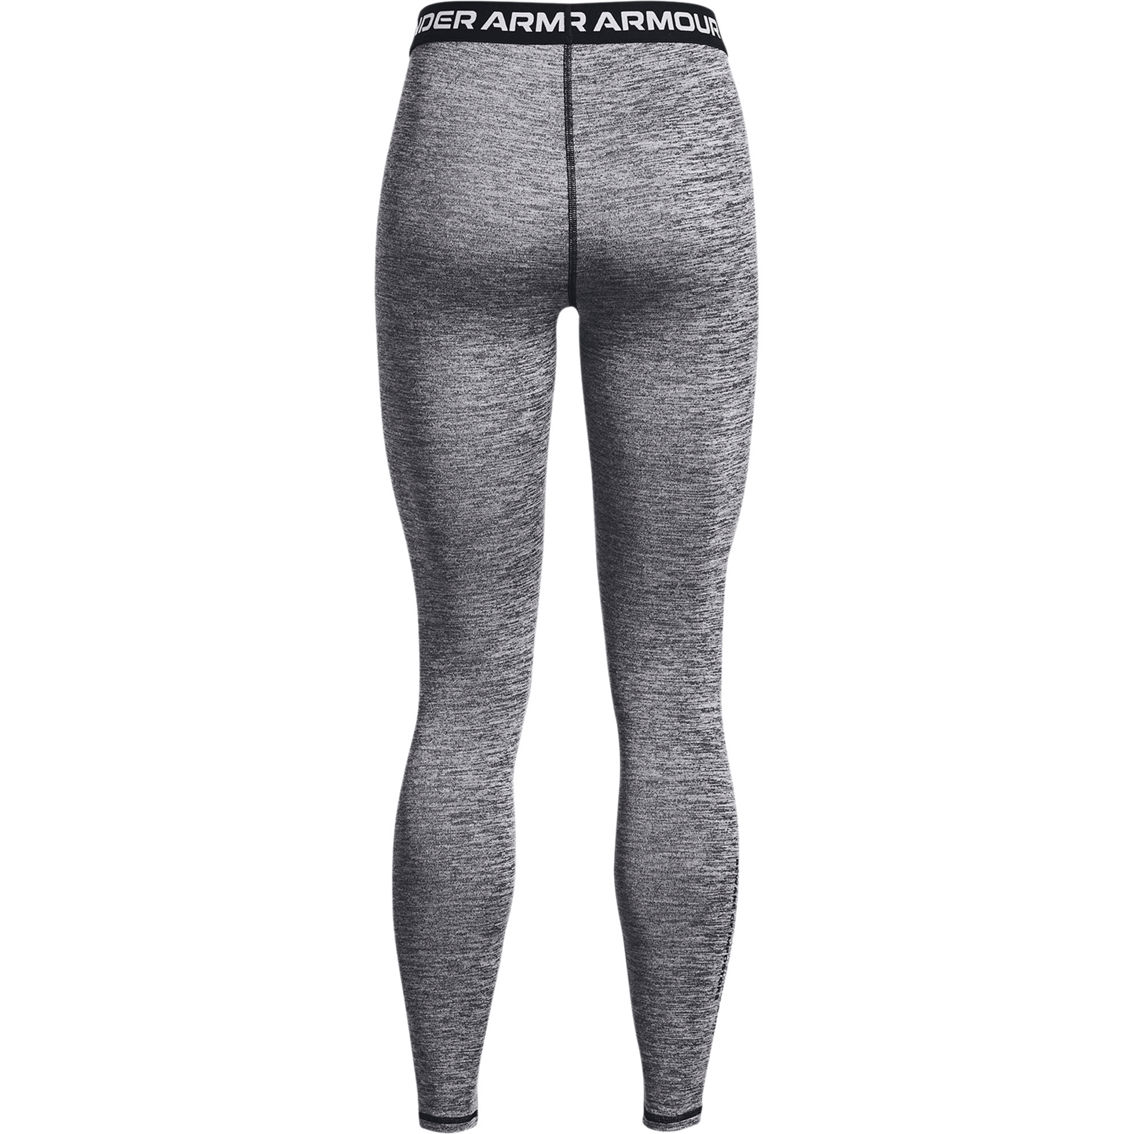 Under Armour Cold Gear Leggings - Image 6 of 6